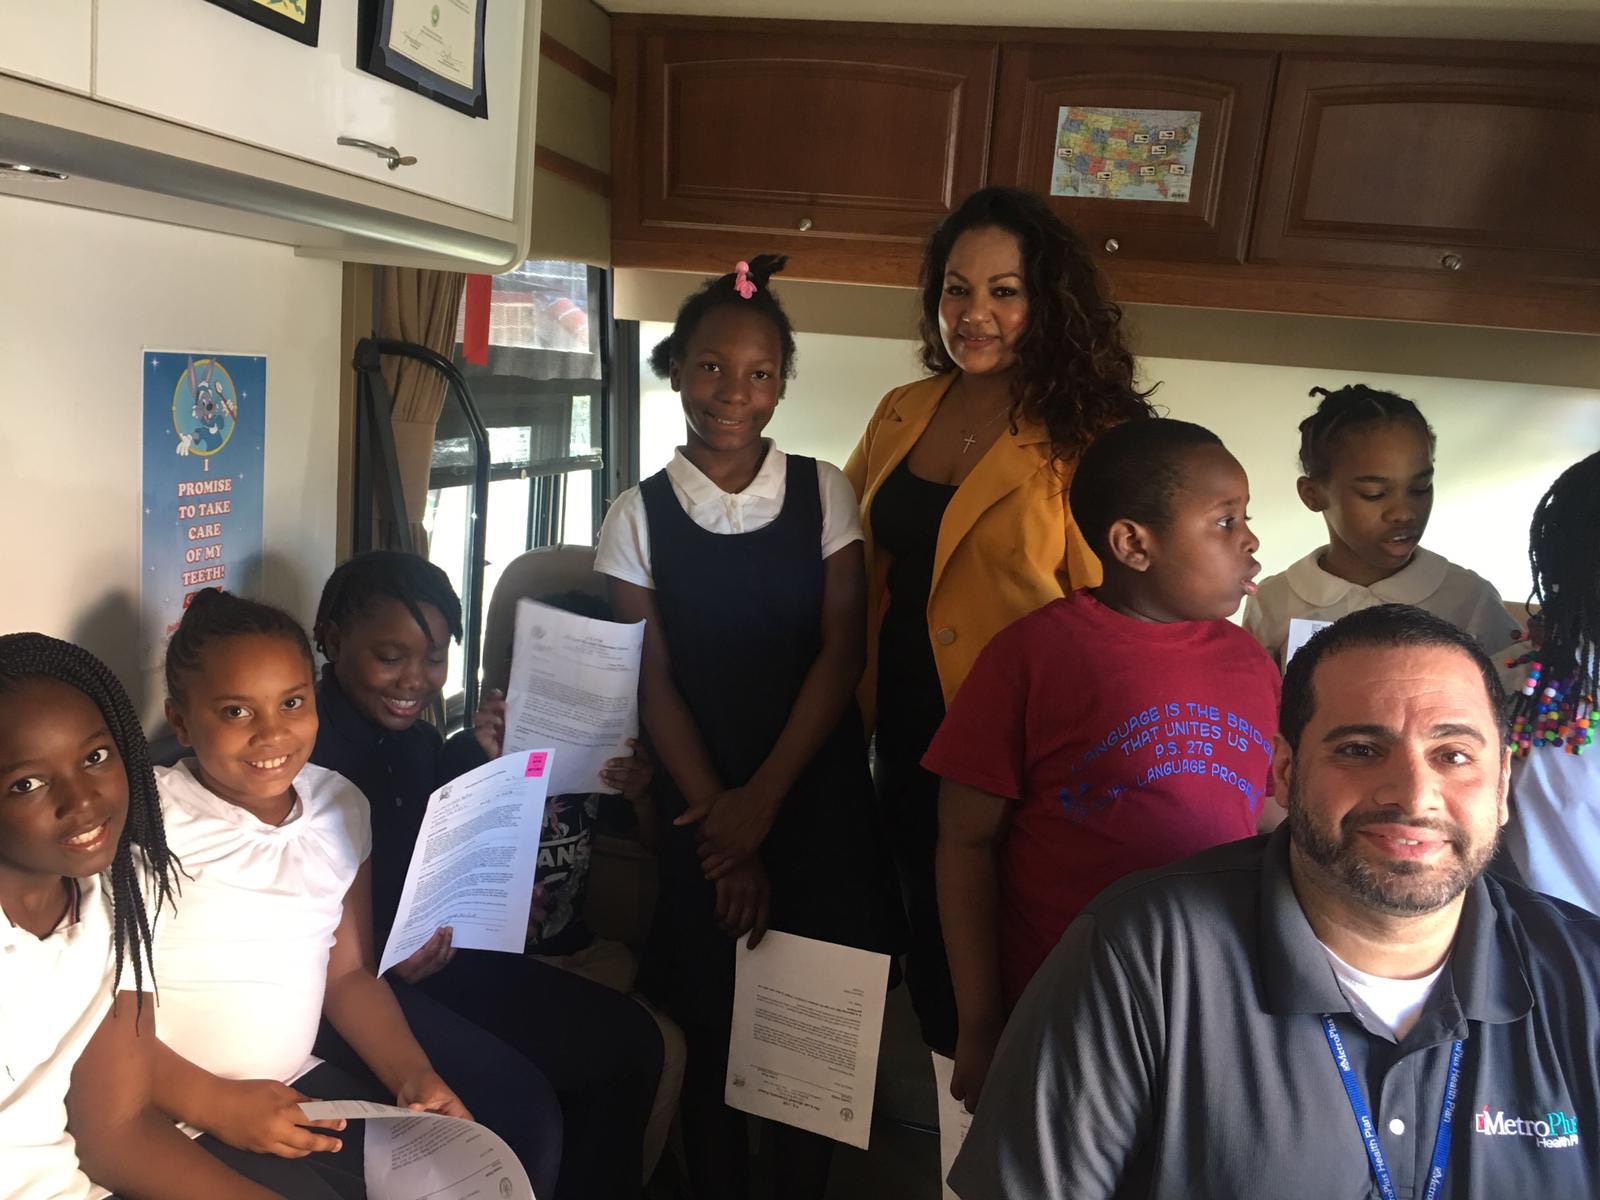 Colgate Bright Smiles, Bright Futures in conjunction with Assembly member Jaime Williams showcase the importance of good oral health habits with students from P.S 276.